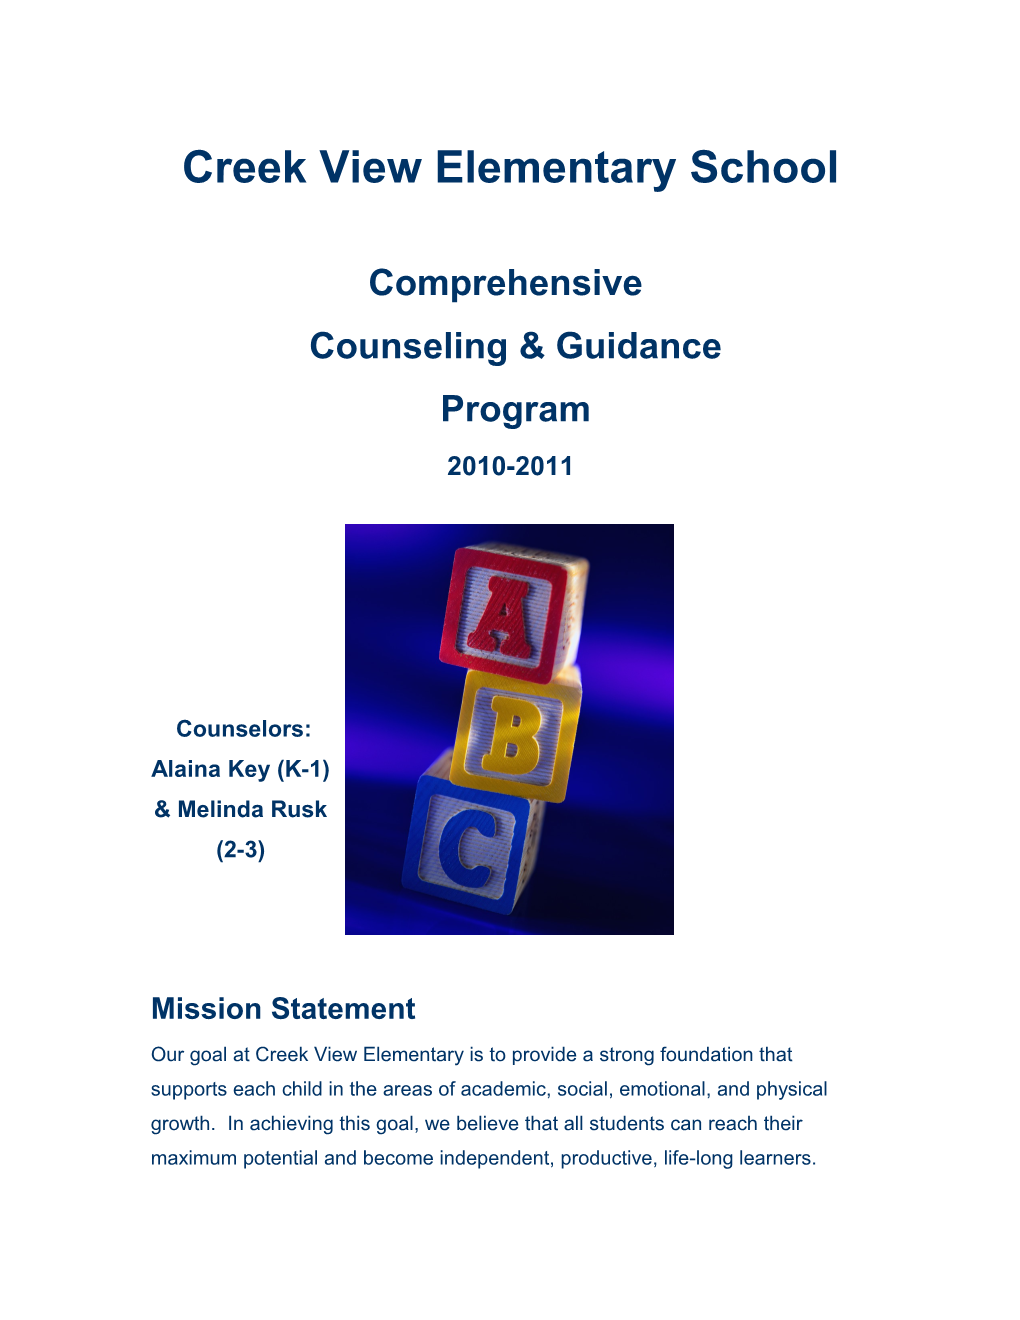 Chelsea Elementary School S Comprehensive Counseling and Guidance Program